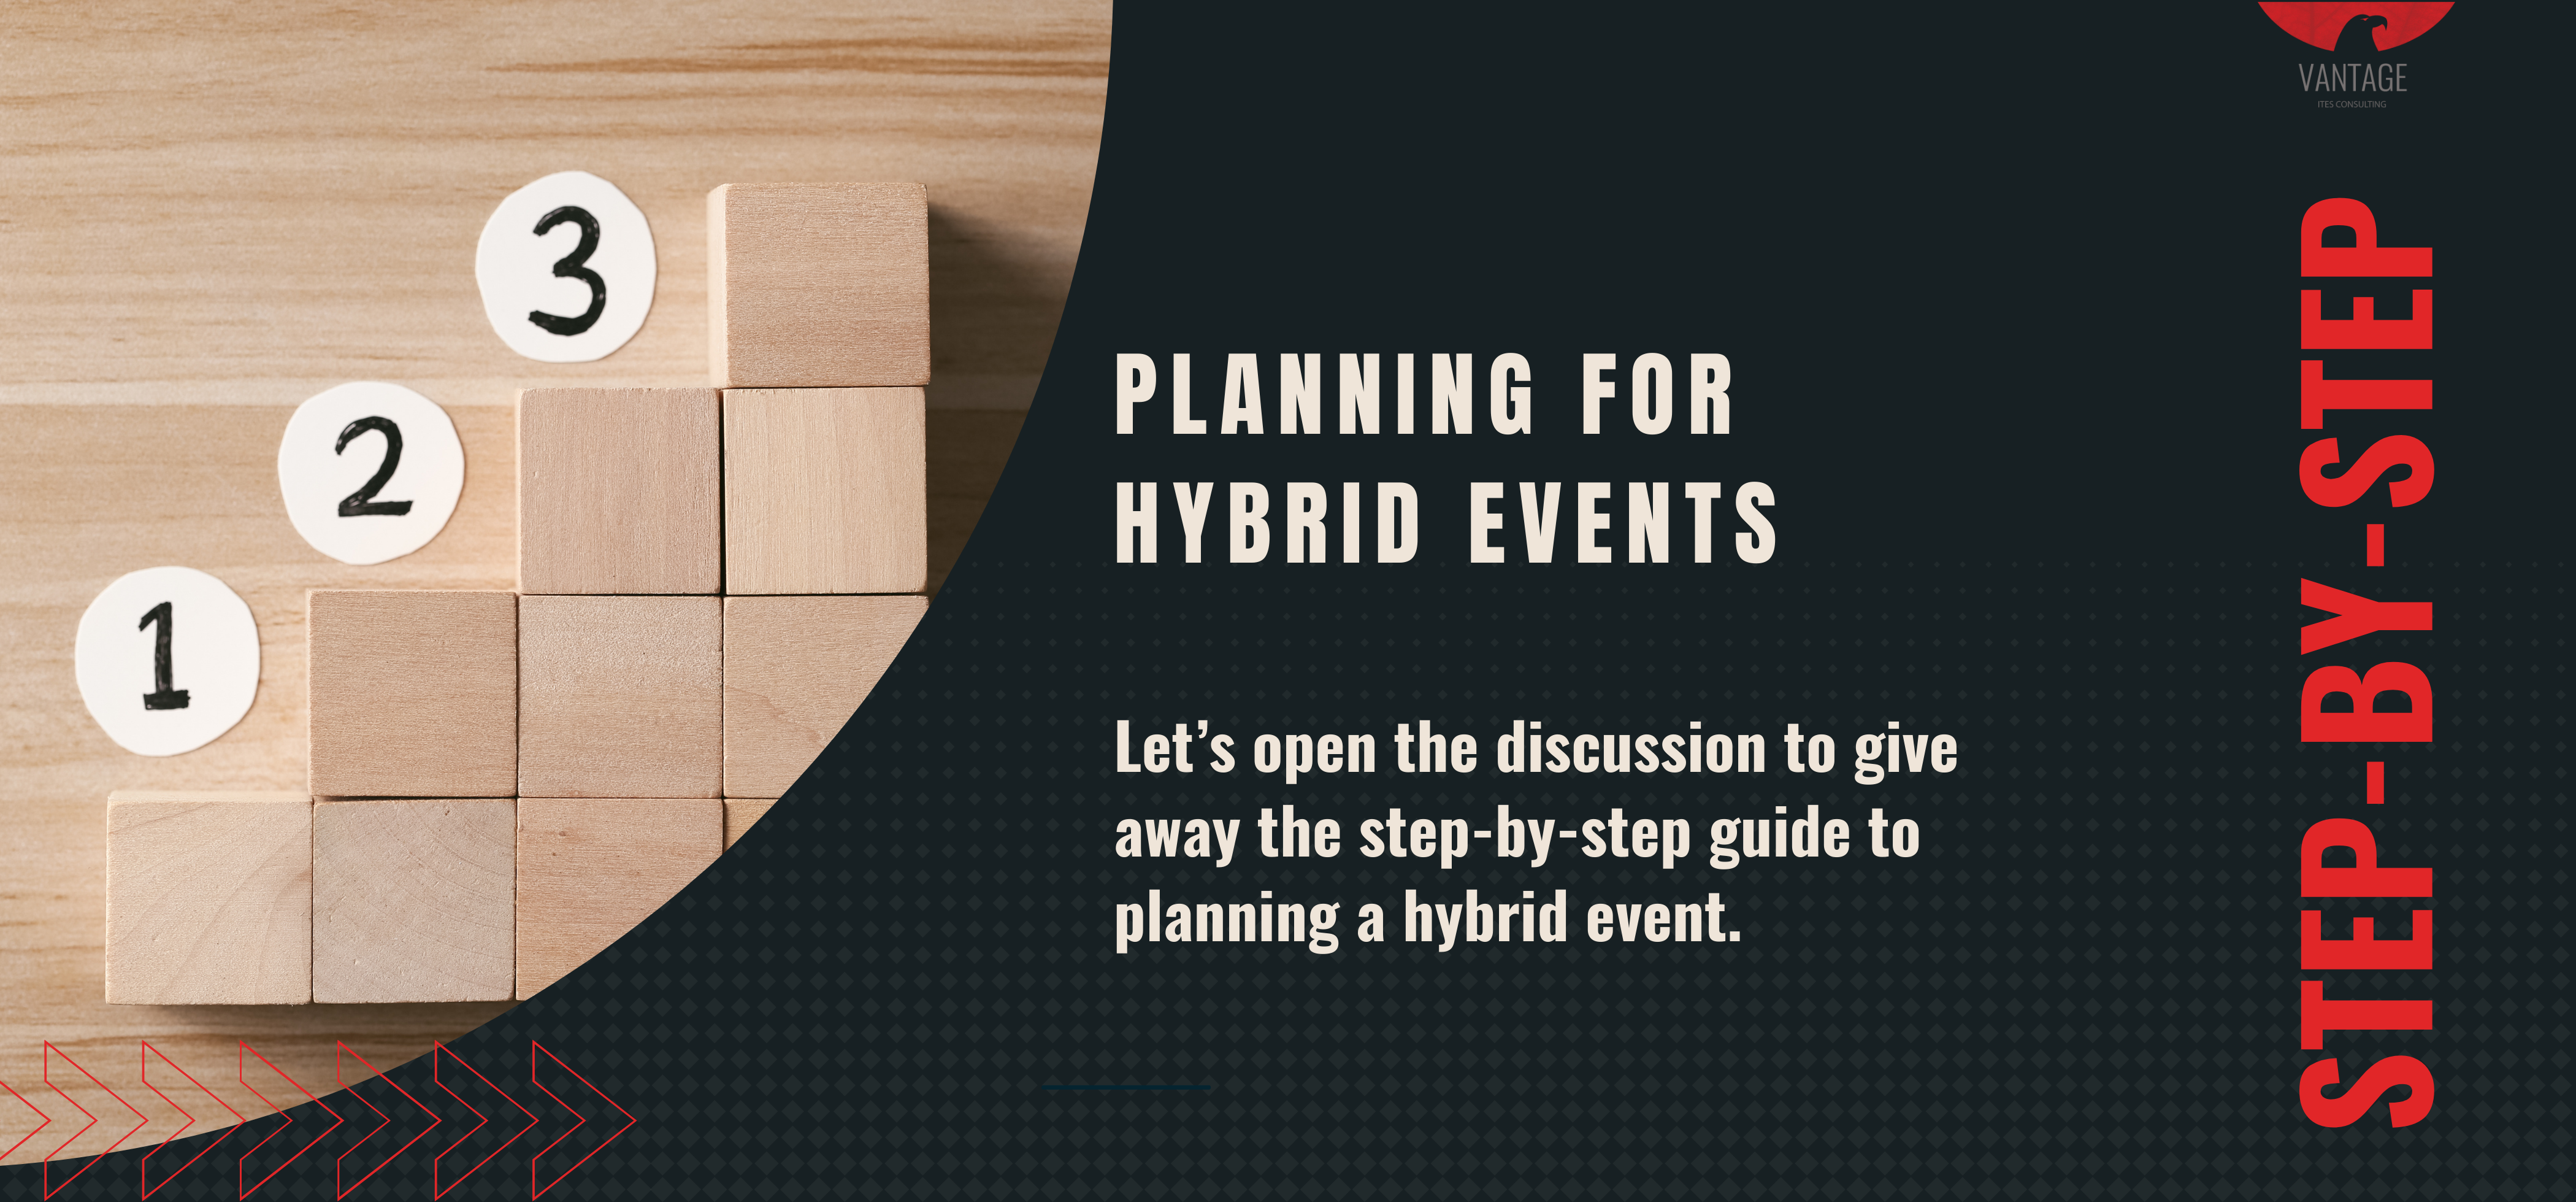 Step-by-Step process for Hybrid Events